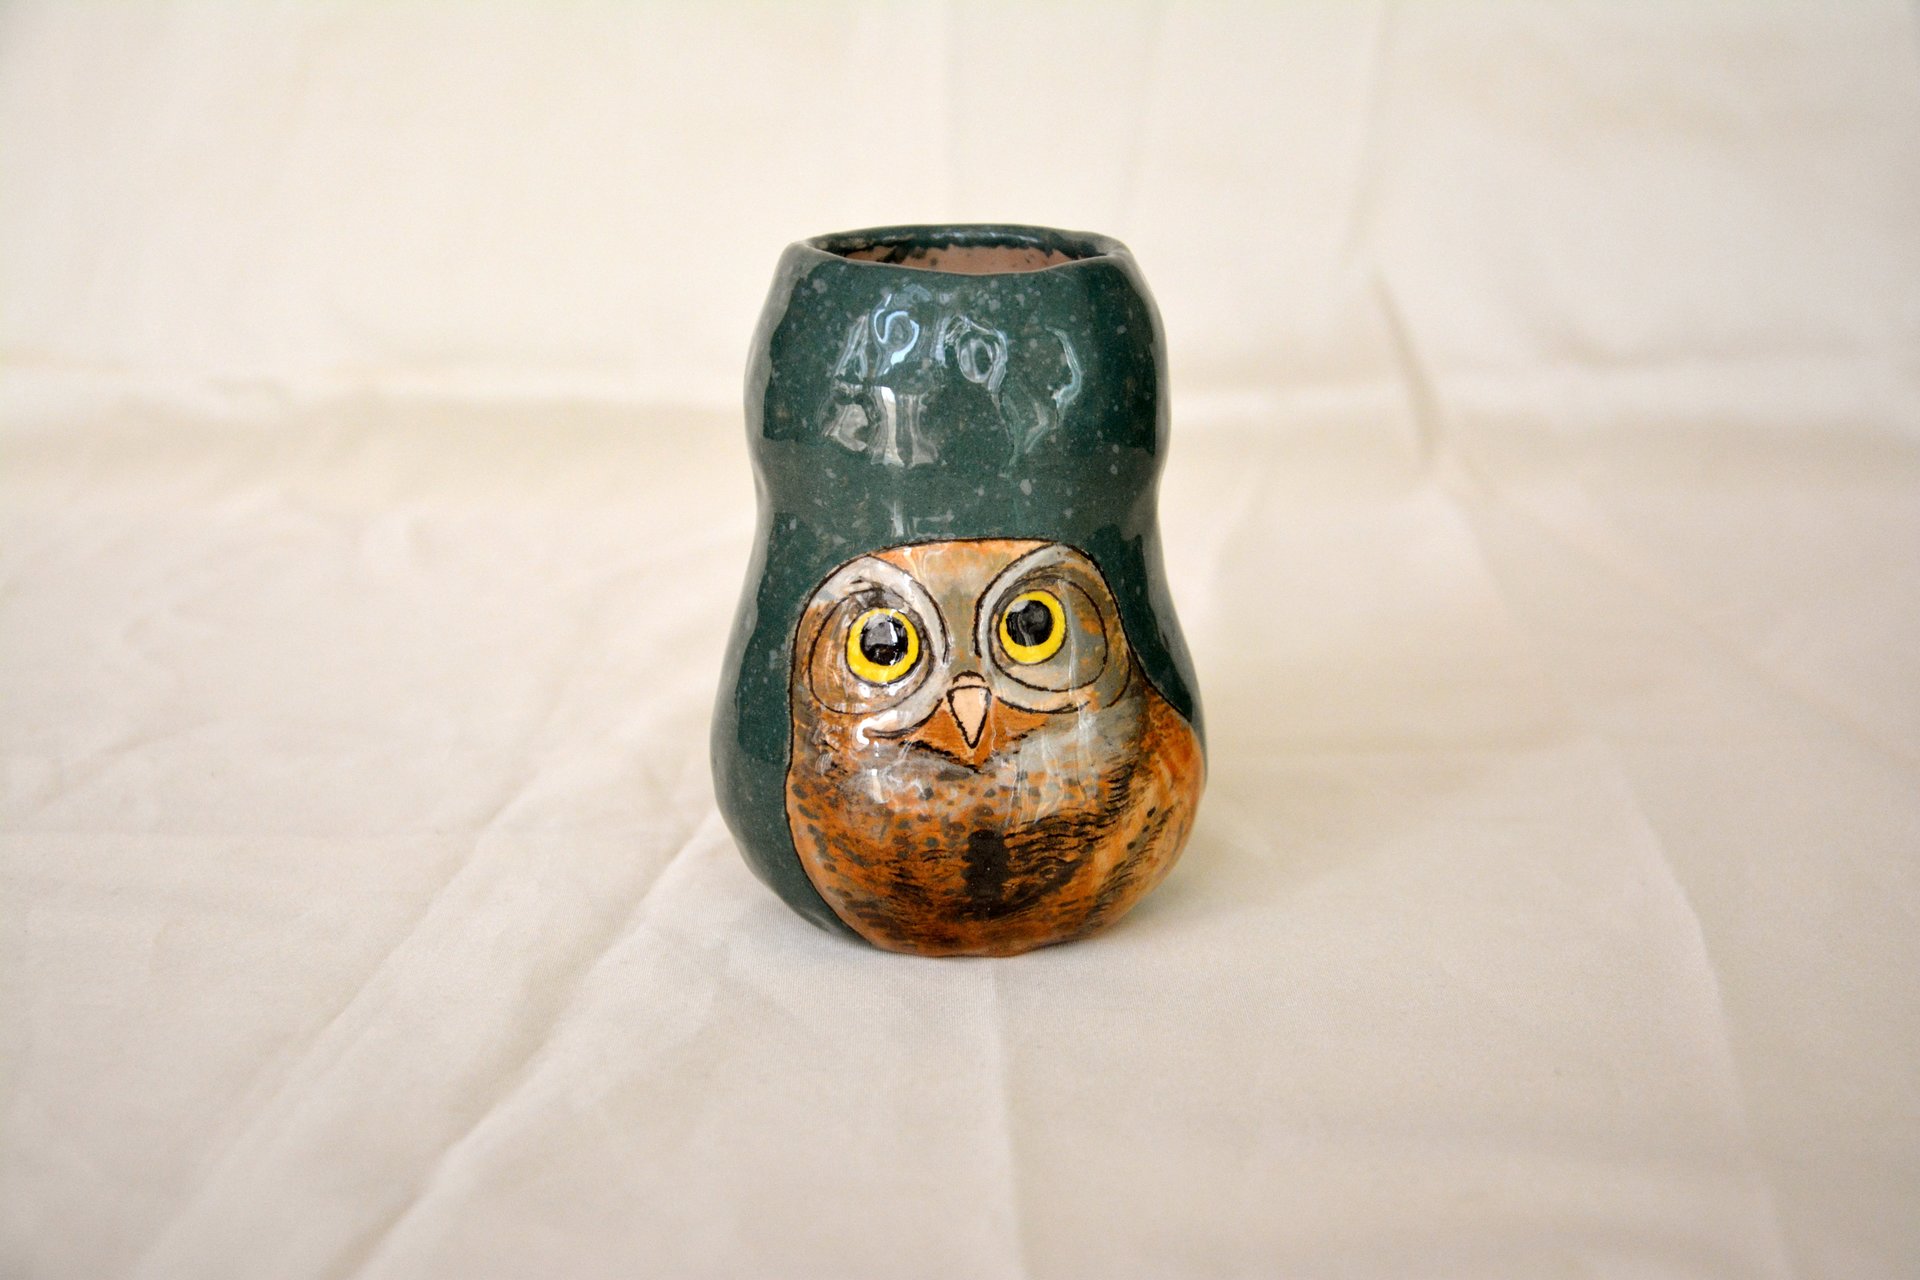 Hand-painted vase — Sweet Owlet, height - 11 cm, photo 3 of 3. 19.